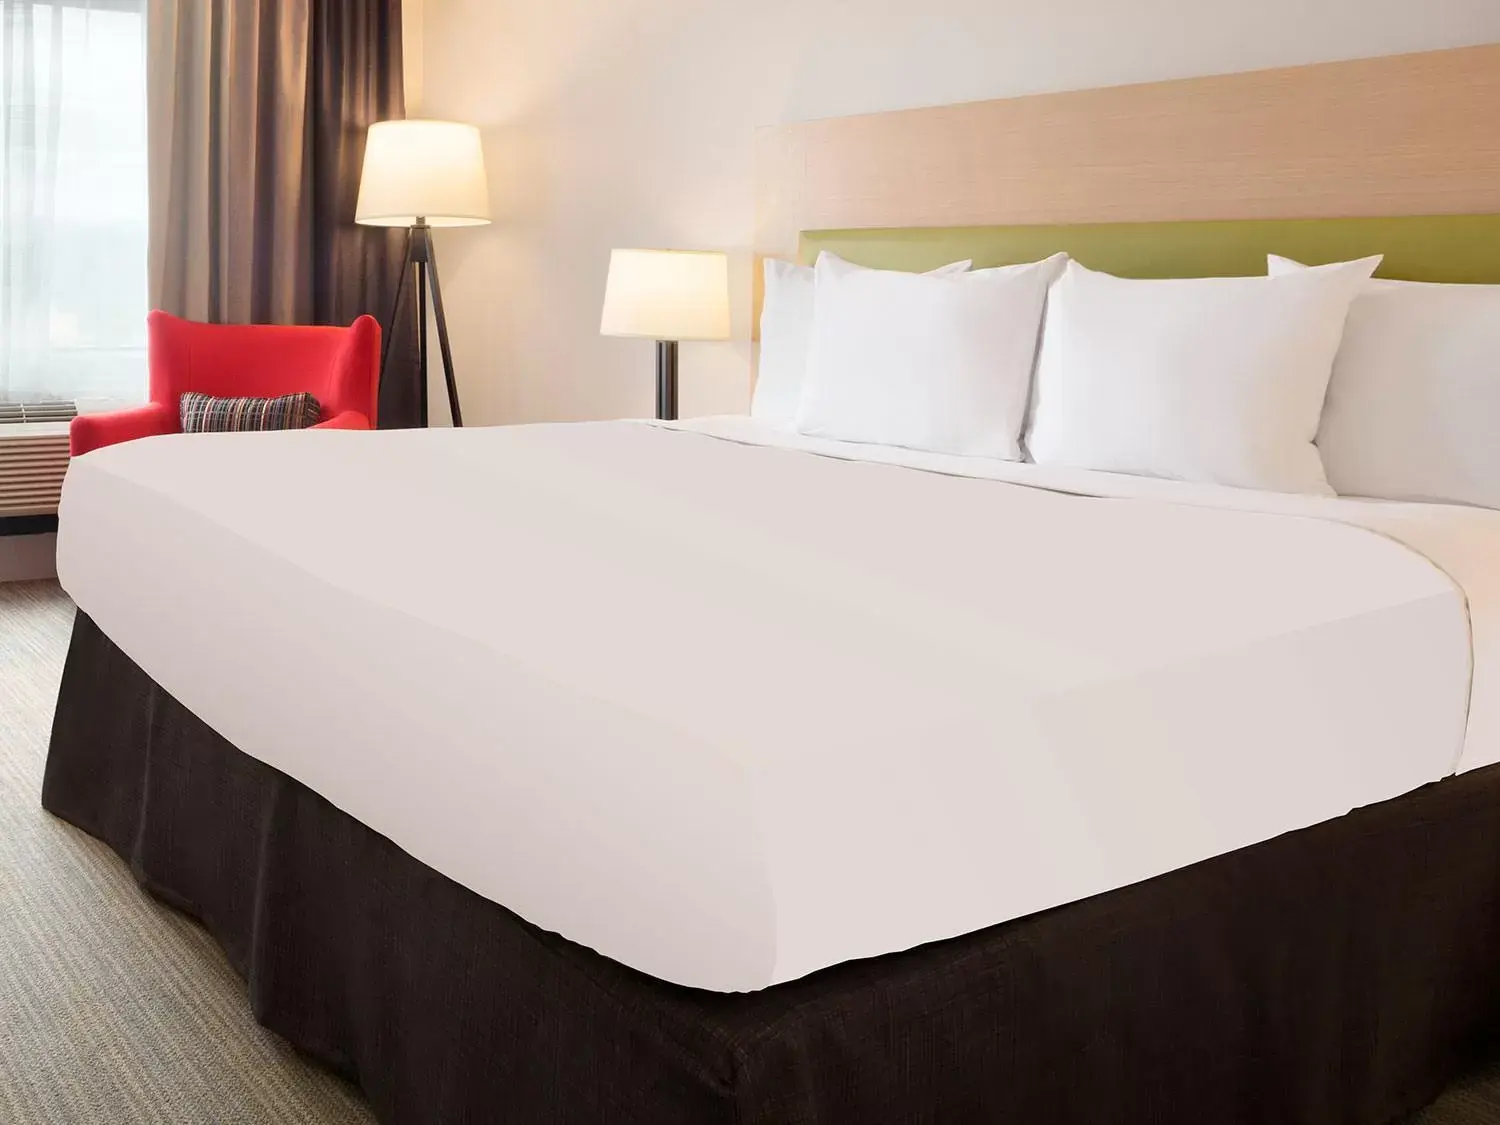 Bed in Country Inn & Suites by Radisson, Minneapolis/Shakopee, MN